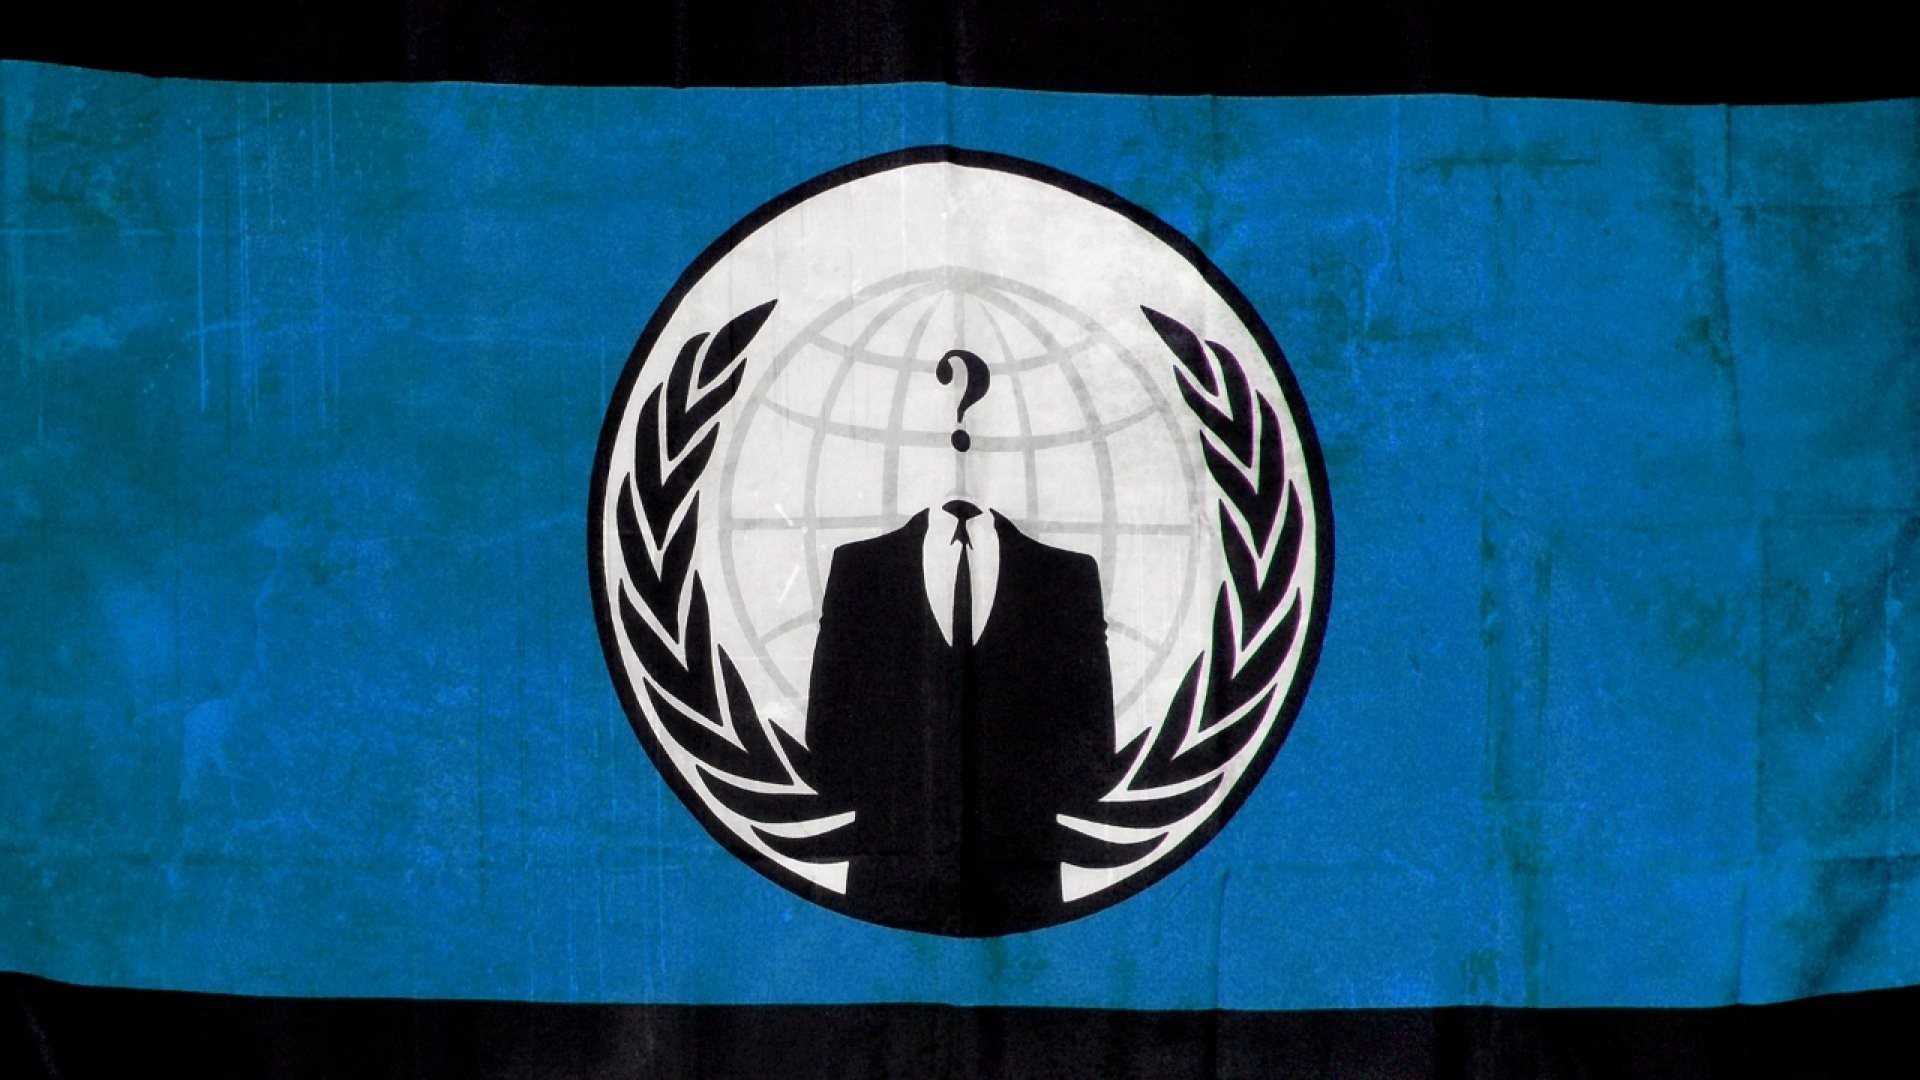 Mobile, Vendetta, Sadic, Dark, Hacking, Wallpaper Stock - Man Without A Head Anonymous - HD Wallpaper 